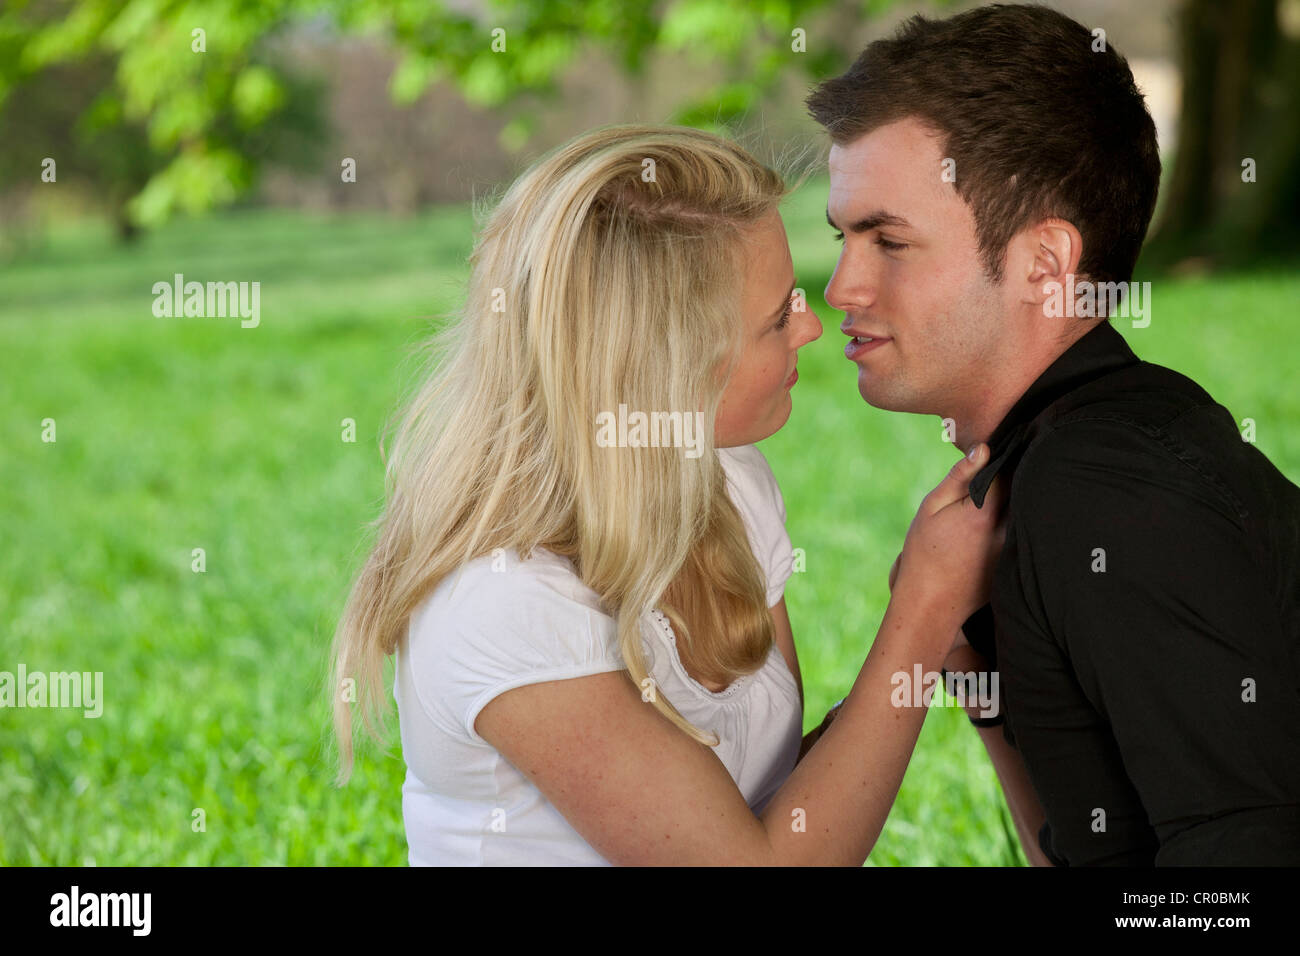 Young couple getting close in a park, spring Stock Photo